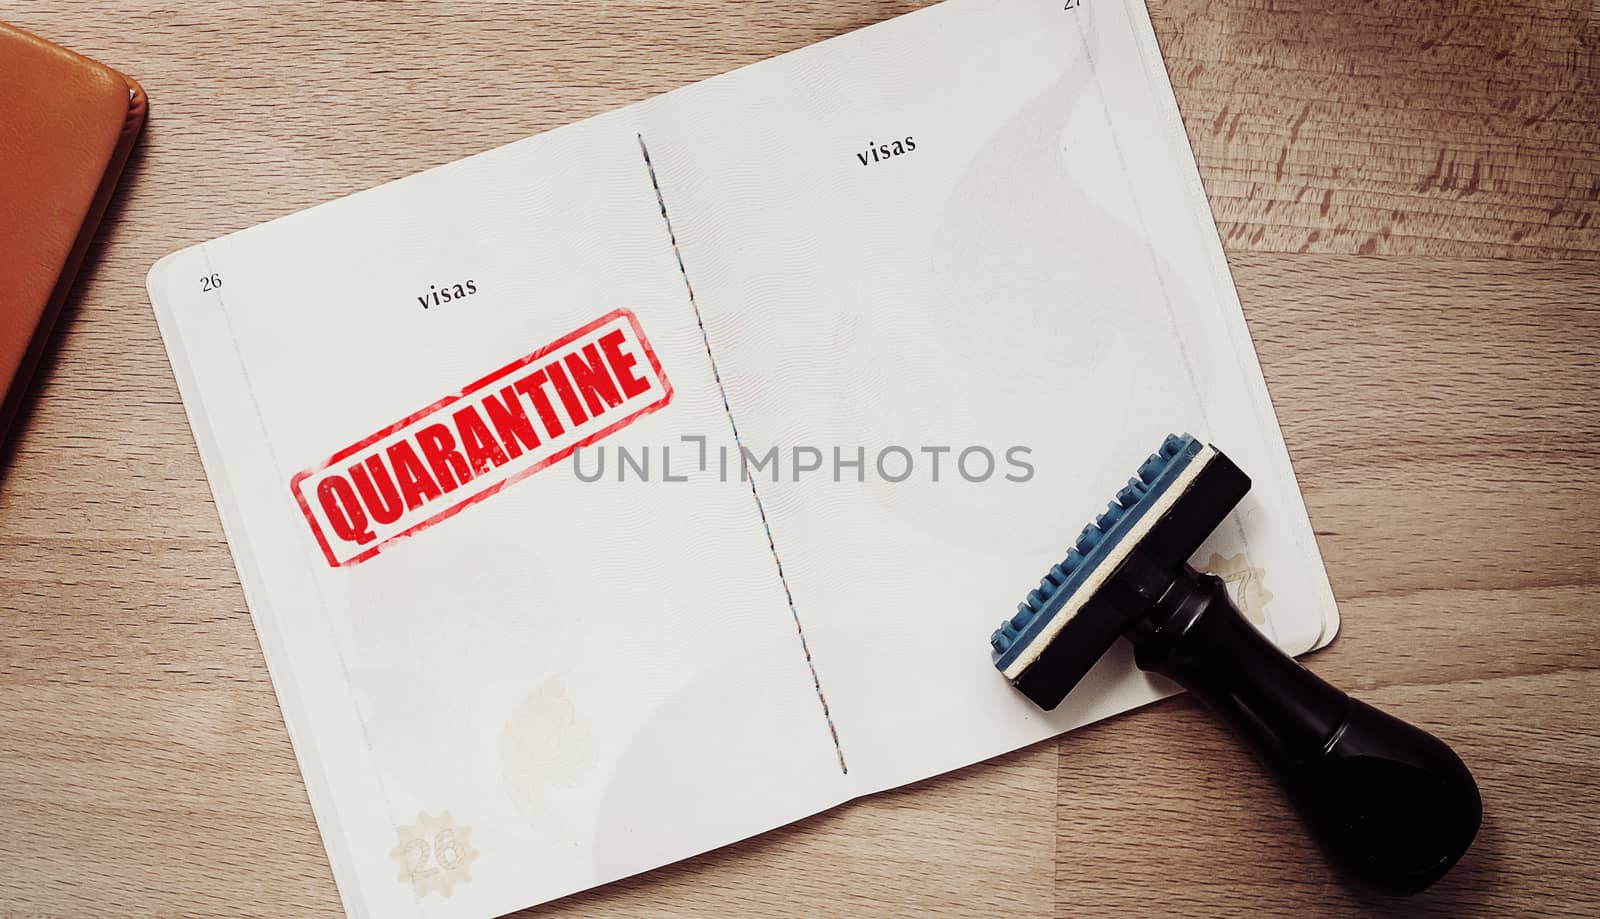 stamp for those who are quarantine in a coronavirus epidemic outbreak situation on passport page for tourist who have a high risk of being infected with a Wuhan virus.